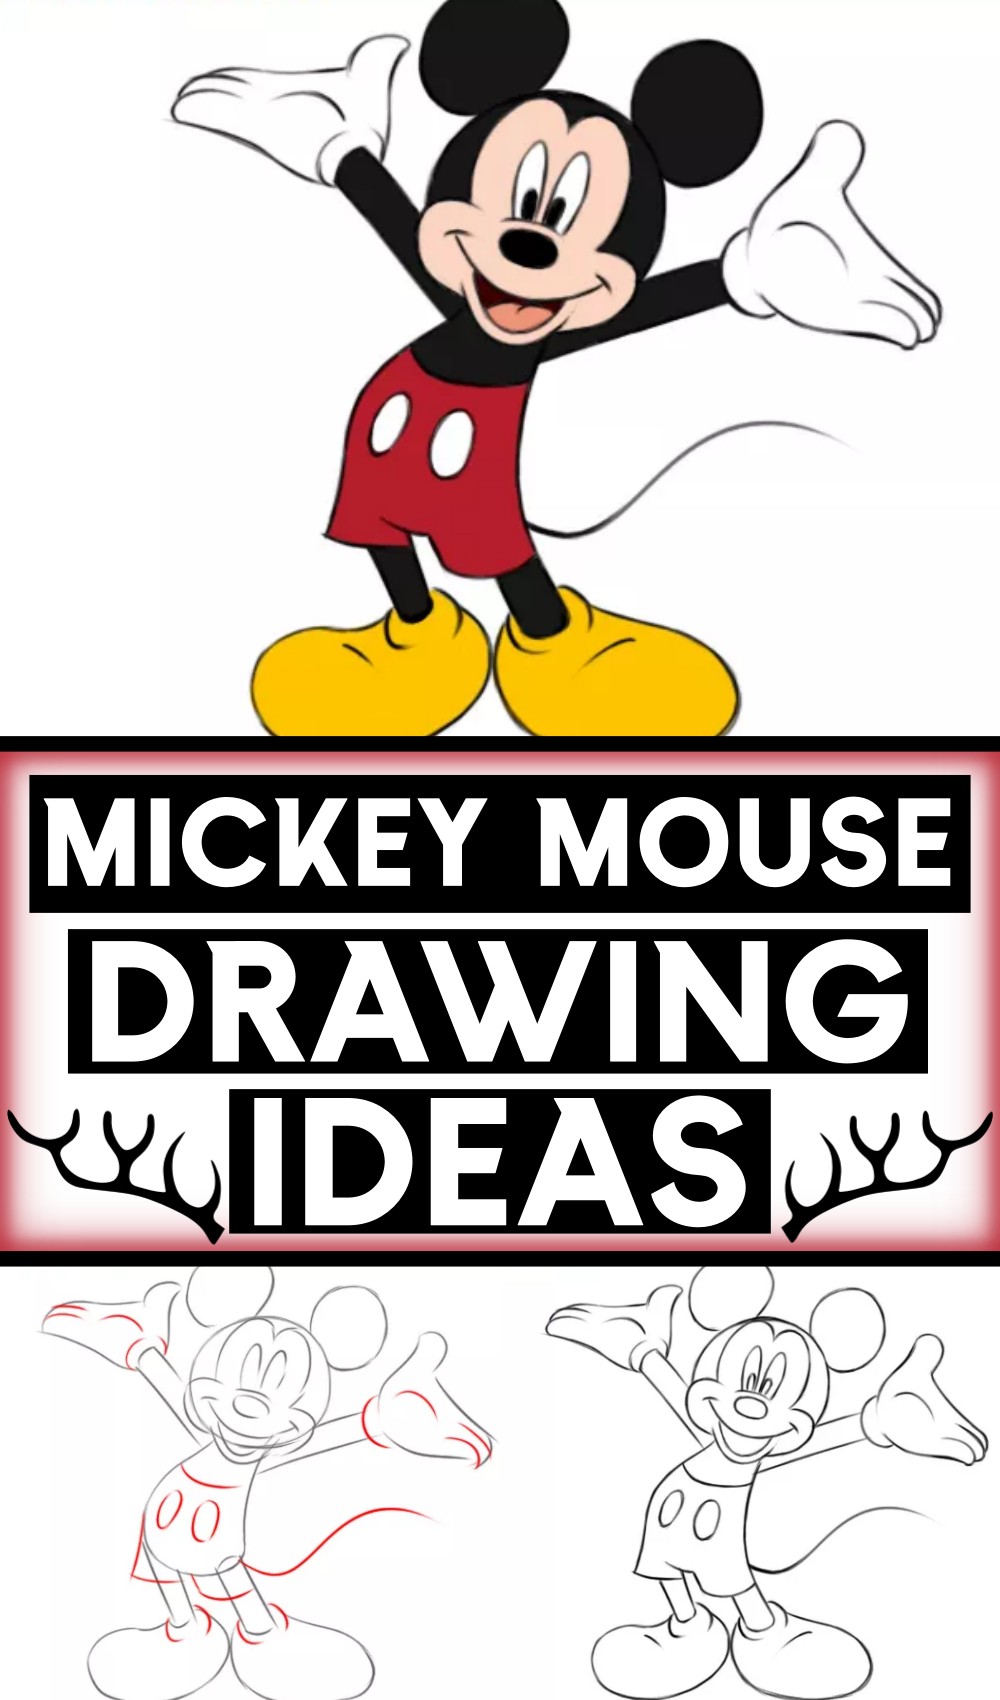 How To Draw Mickey Mouse Easy